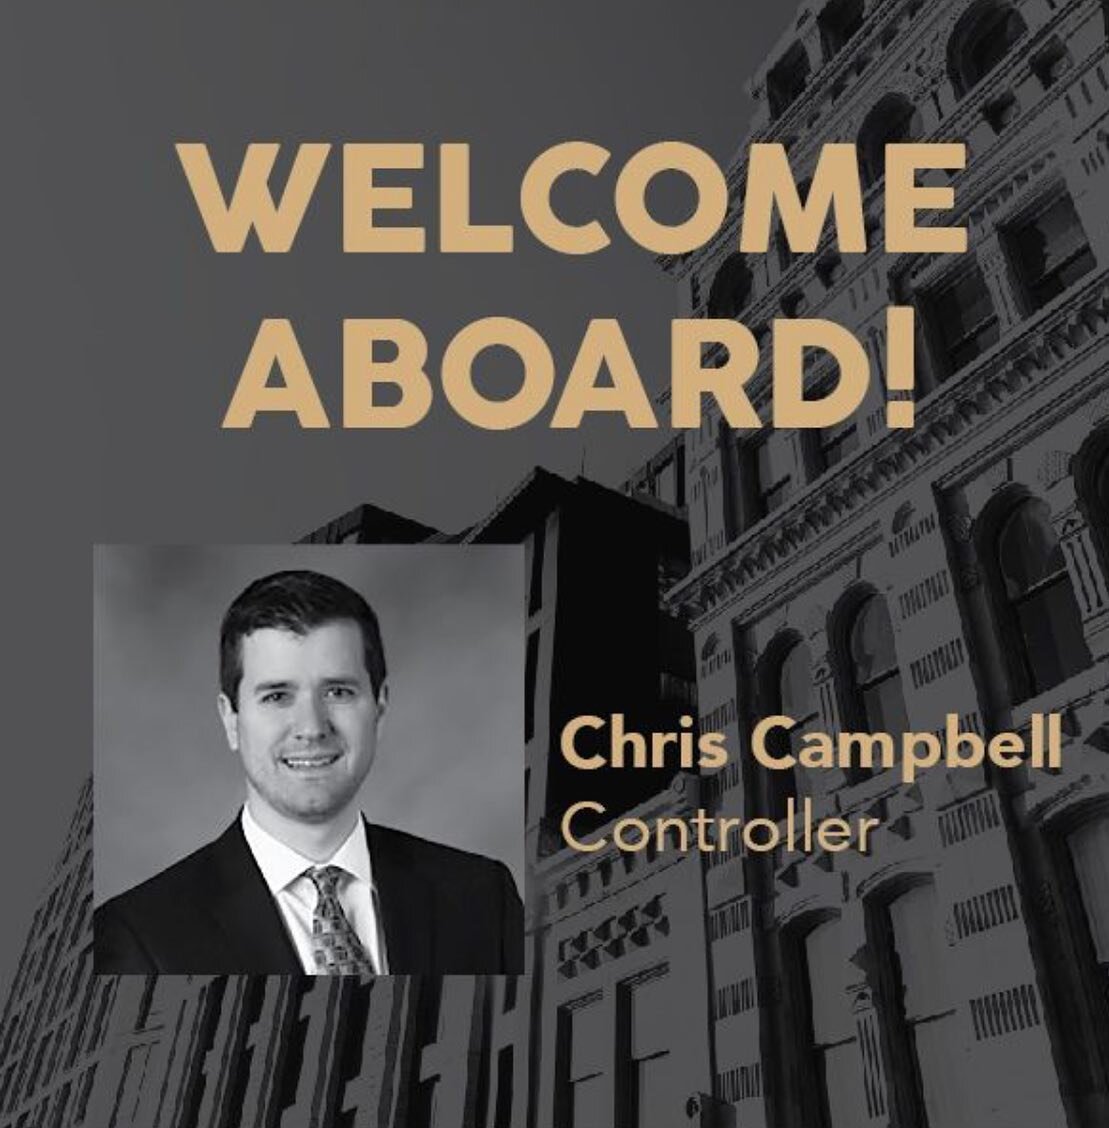 Welcome aboard Chris!